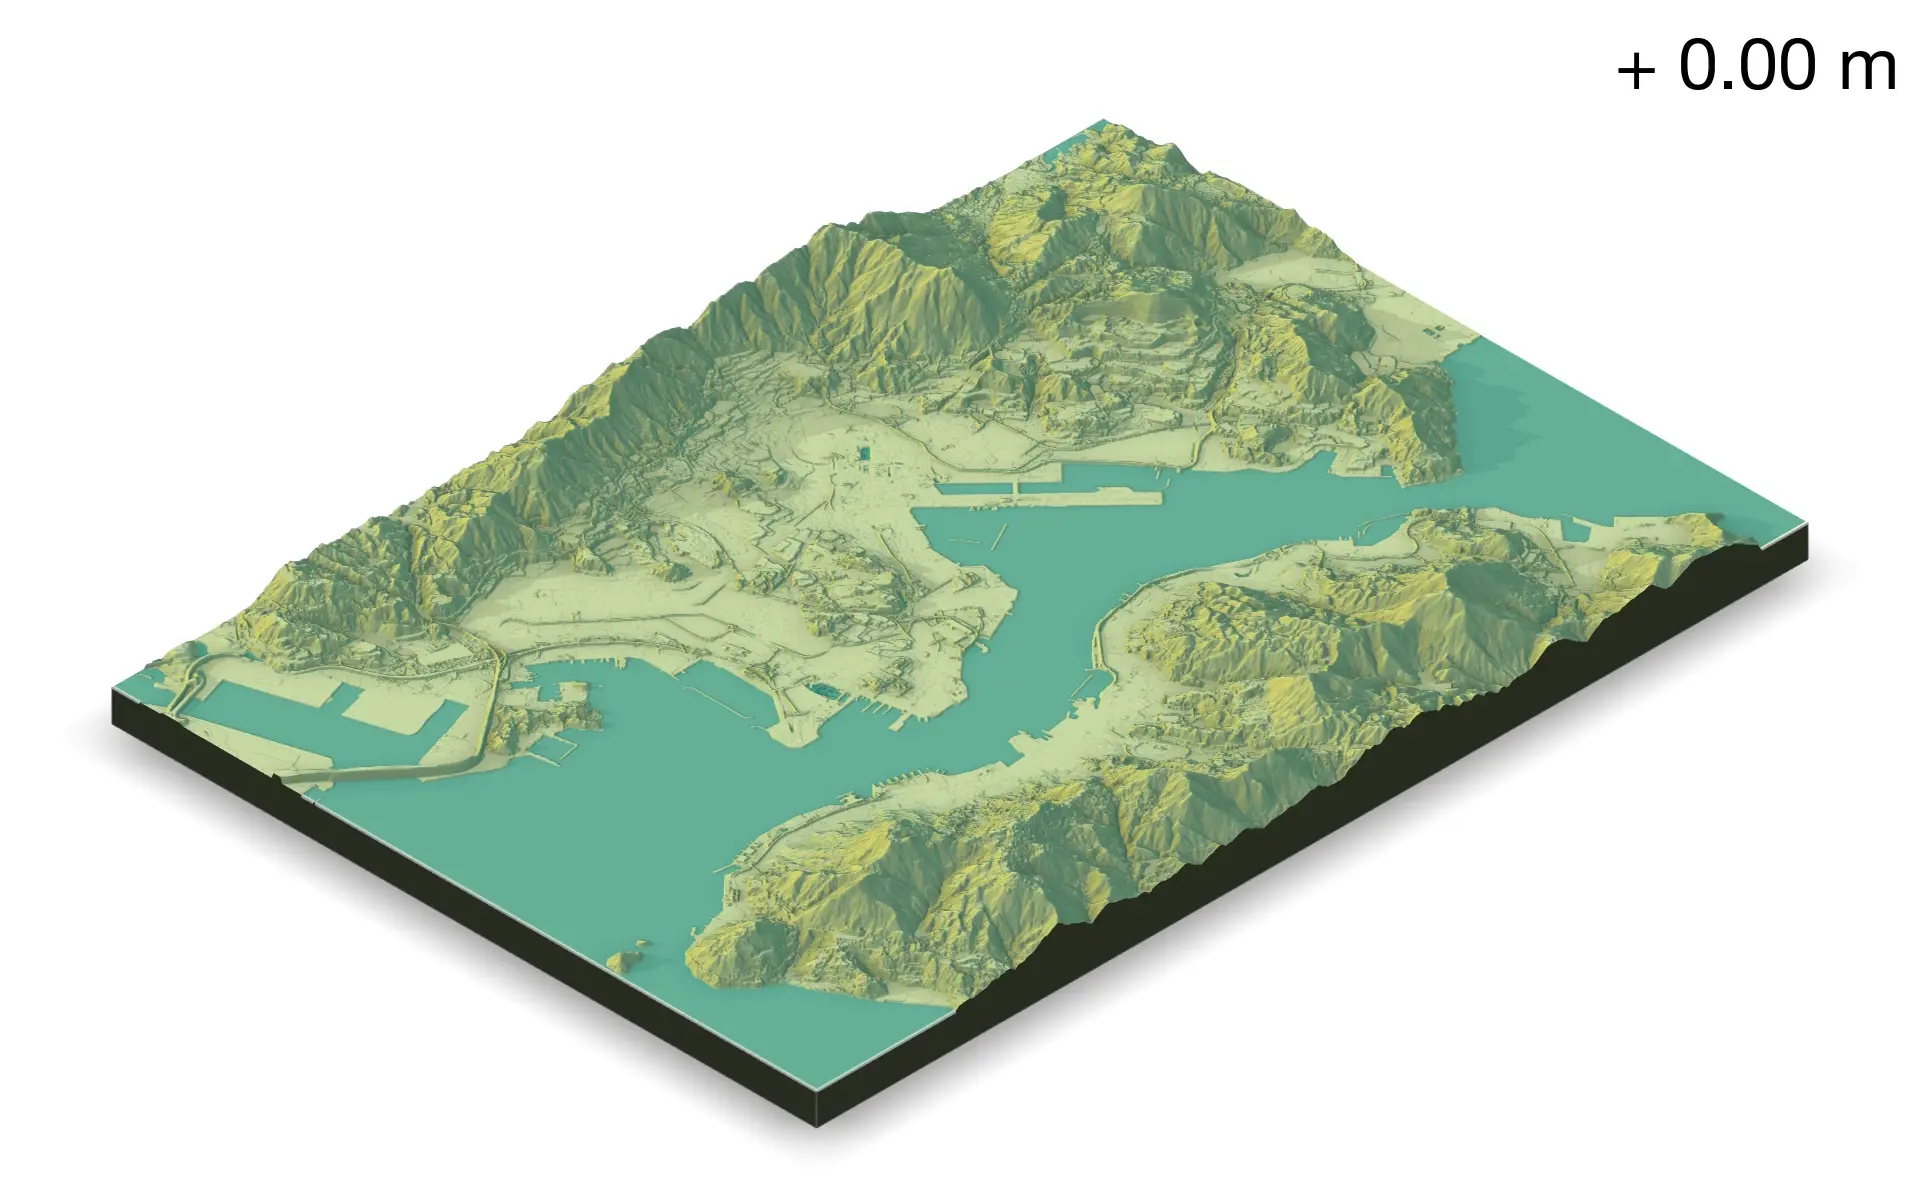 Animation showing the flooded area of Hong Kong when sea level rises to 5 m above current sea level